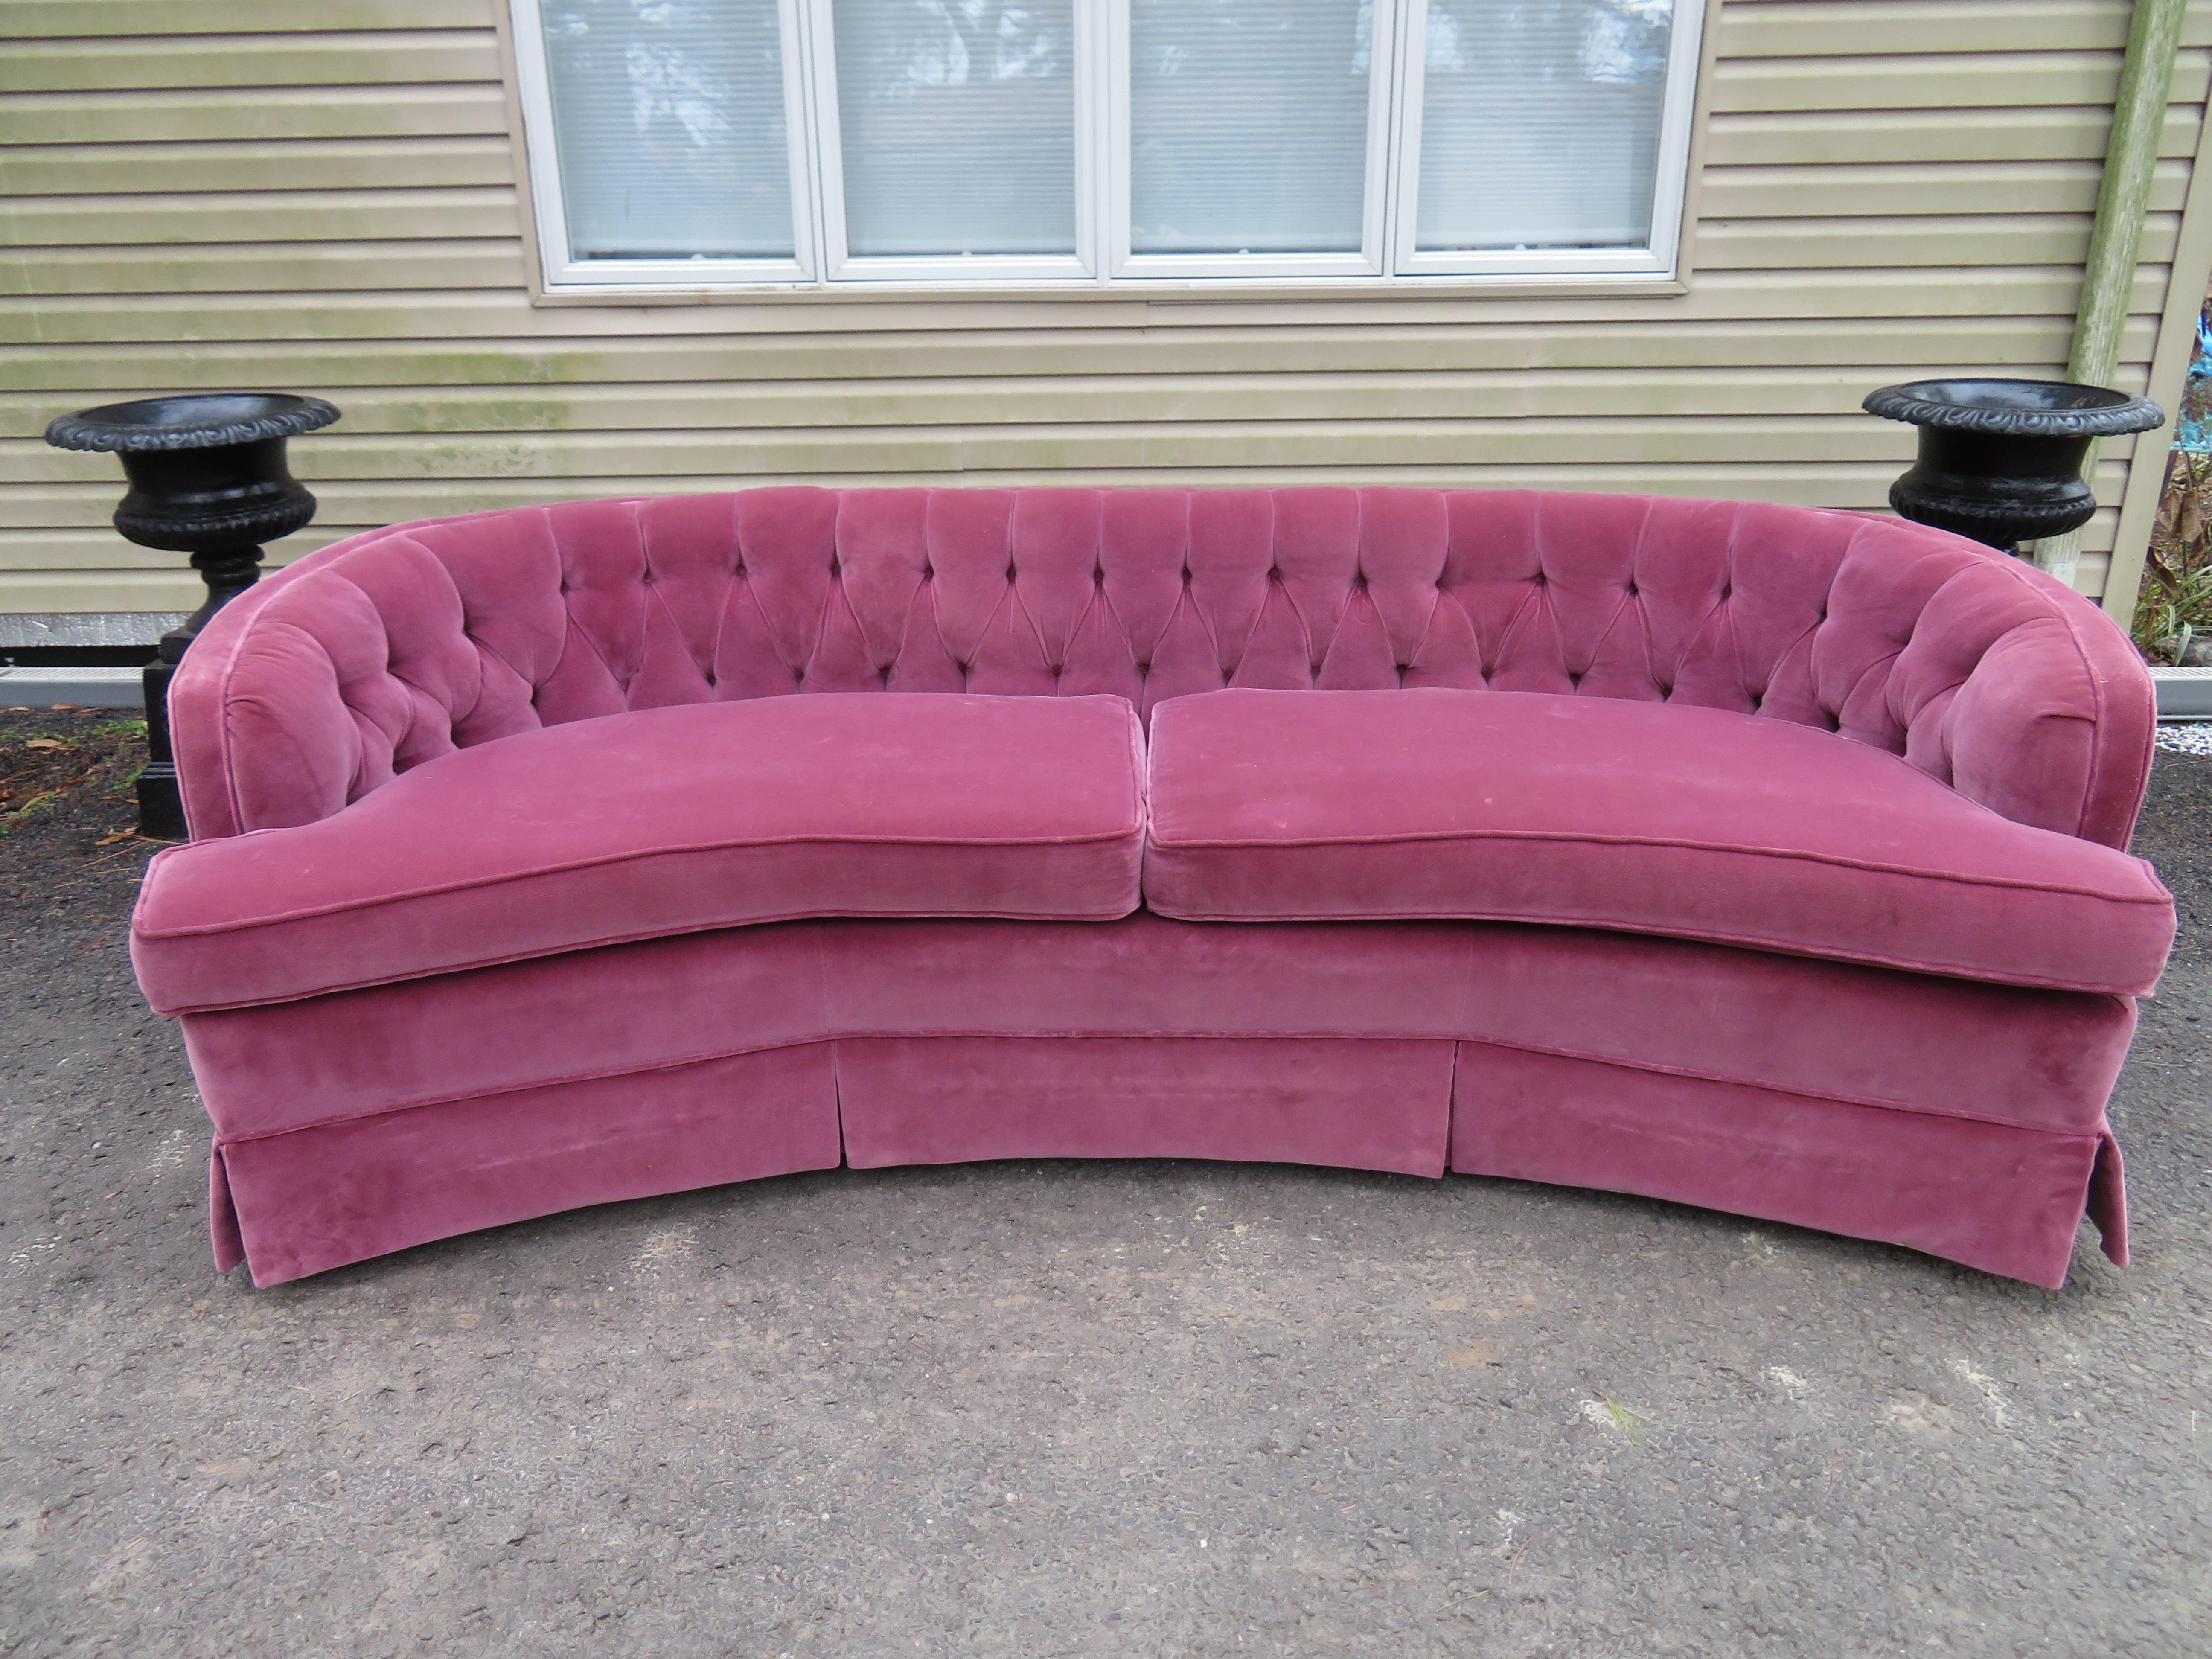 Lovely Dorothy Draper style Lilac velvet curved tufted sofa. This piece is a real beauty as is with just some light wear to original lavender velvet. This sofa measures: 28